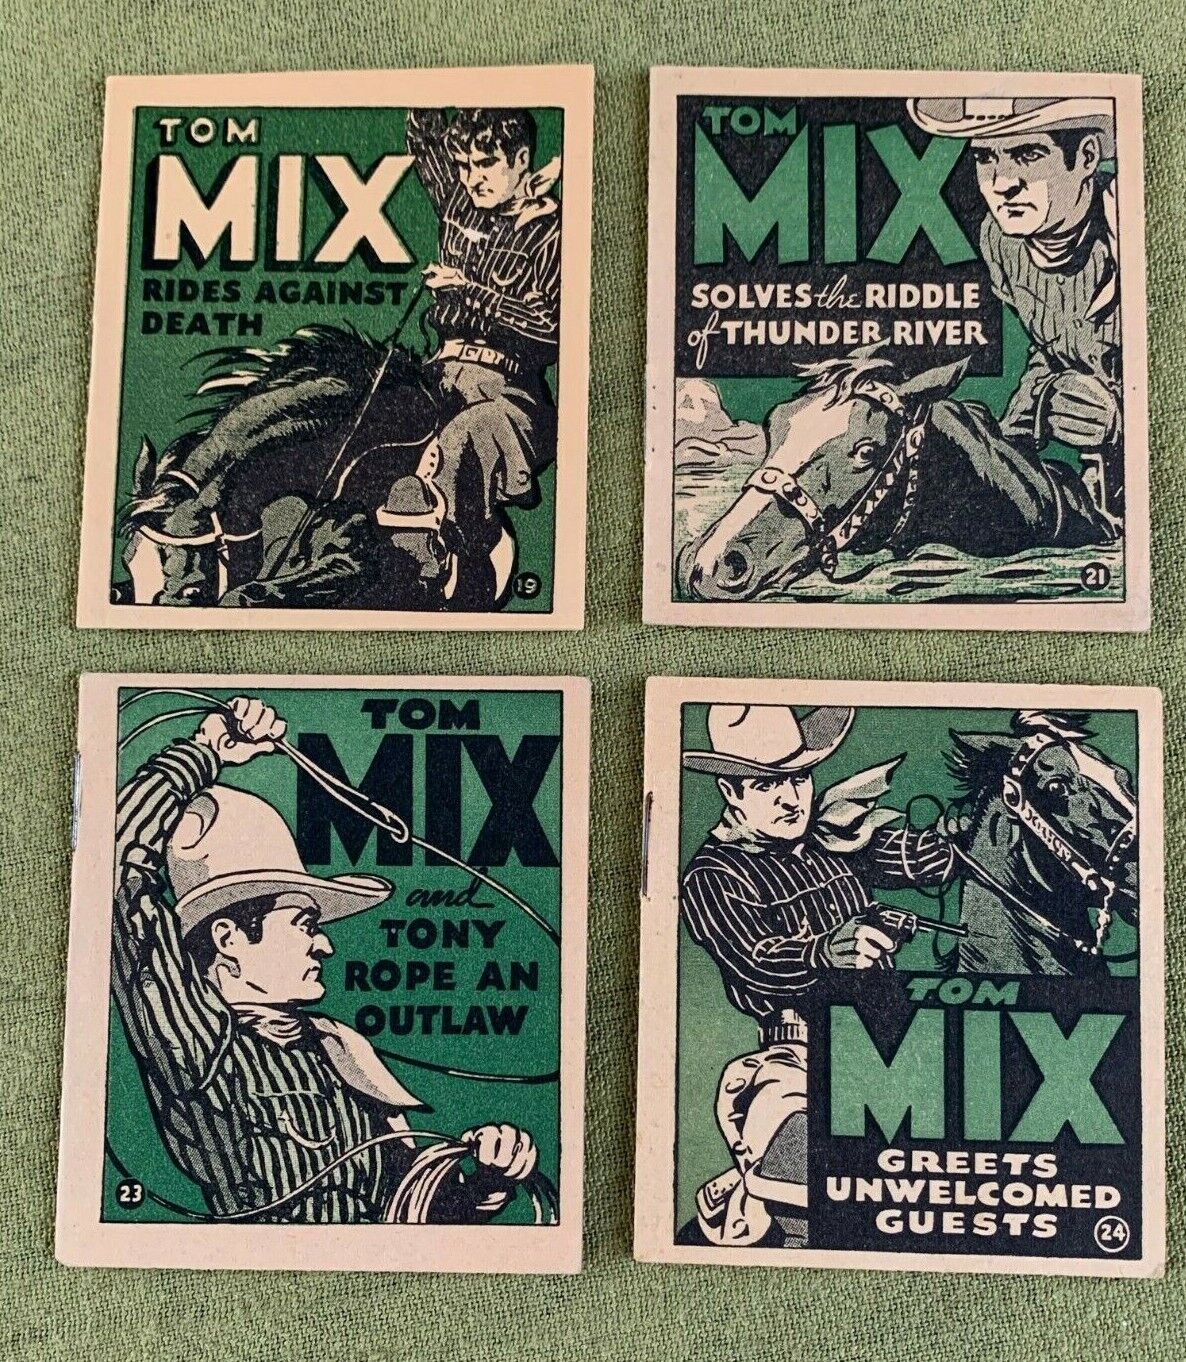 Collection (12) TOM MIX 1934 Gum Booklets ADVENTURE STORIES National Chicle EX+